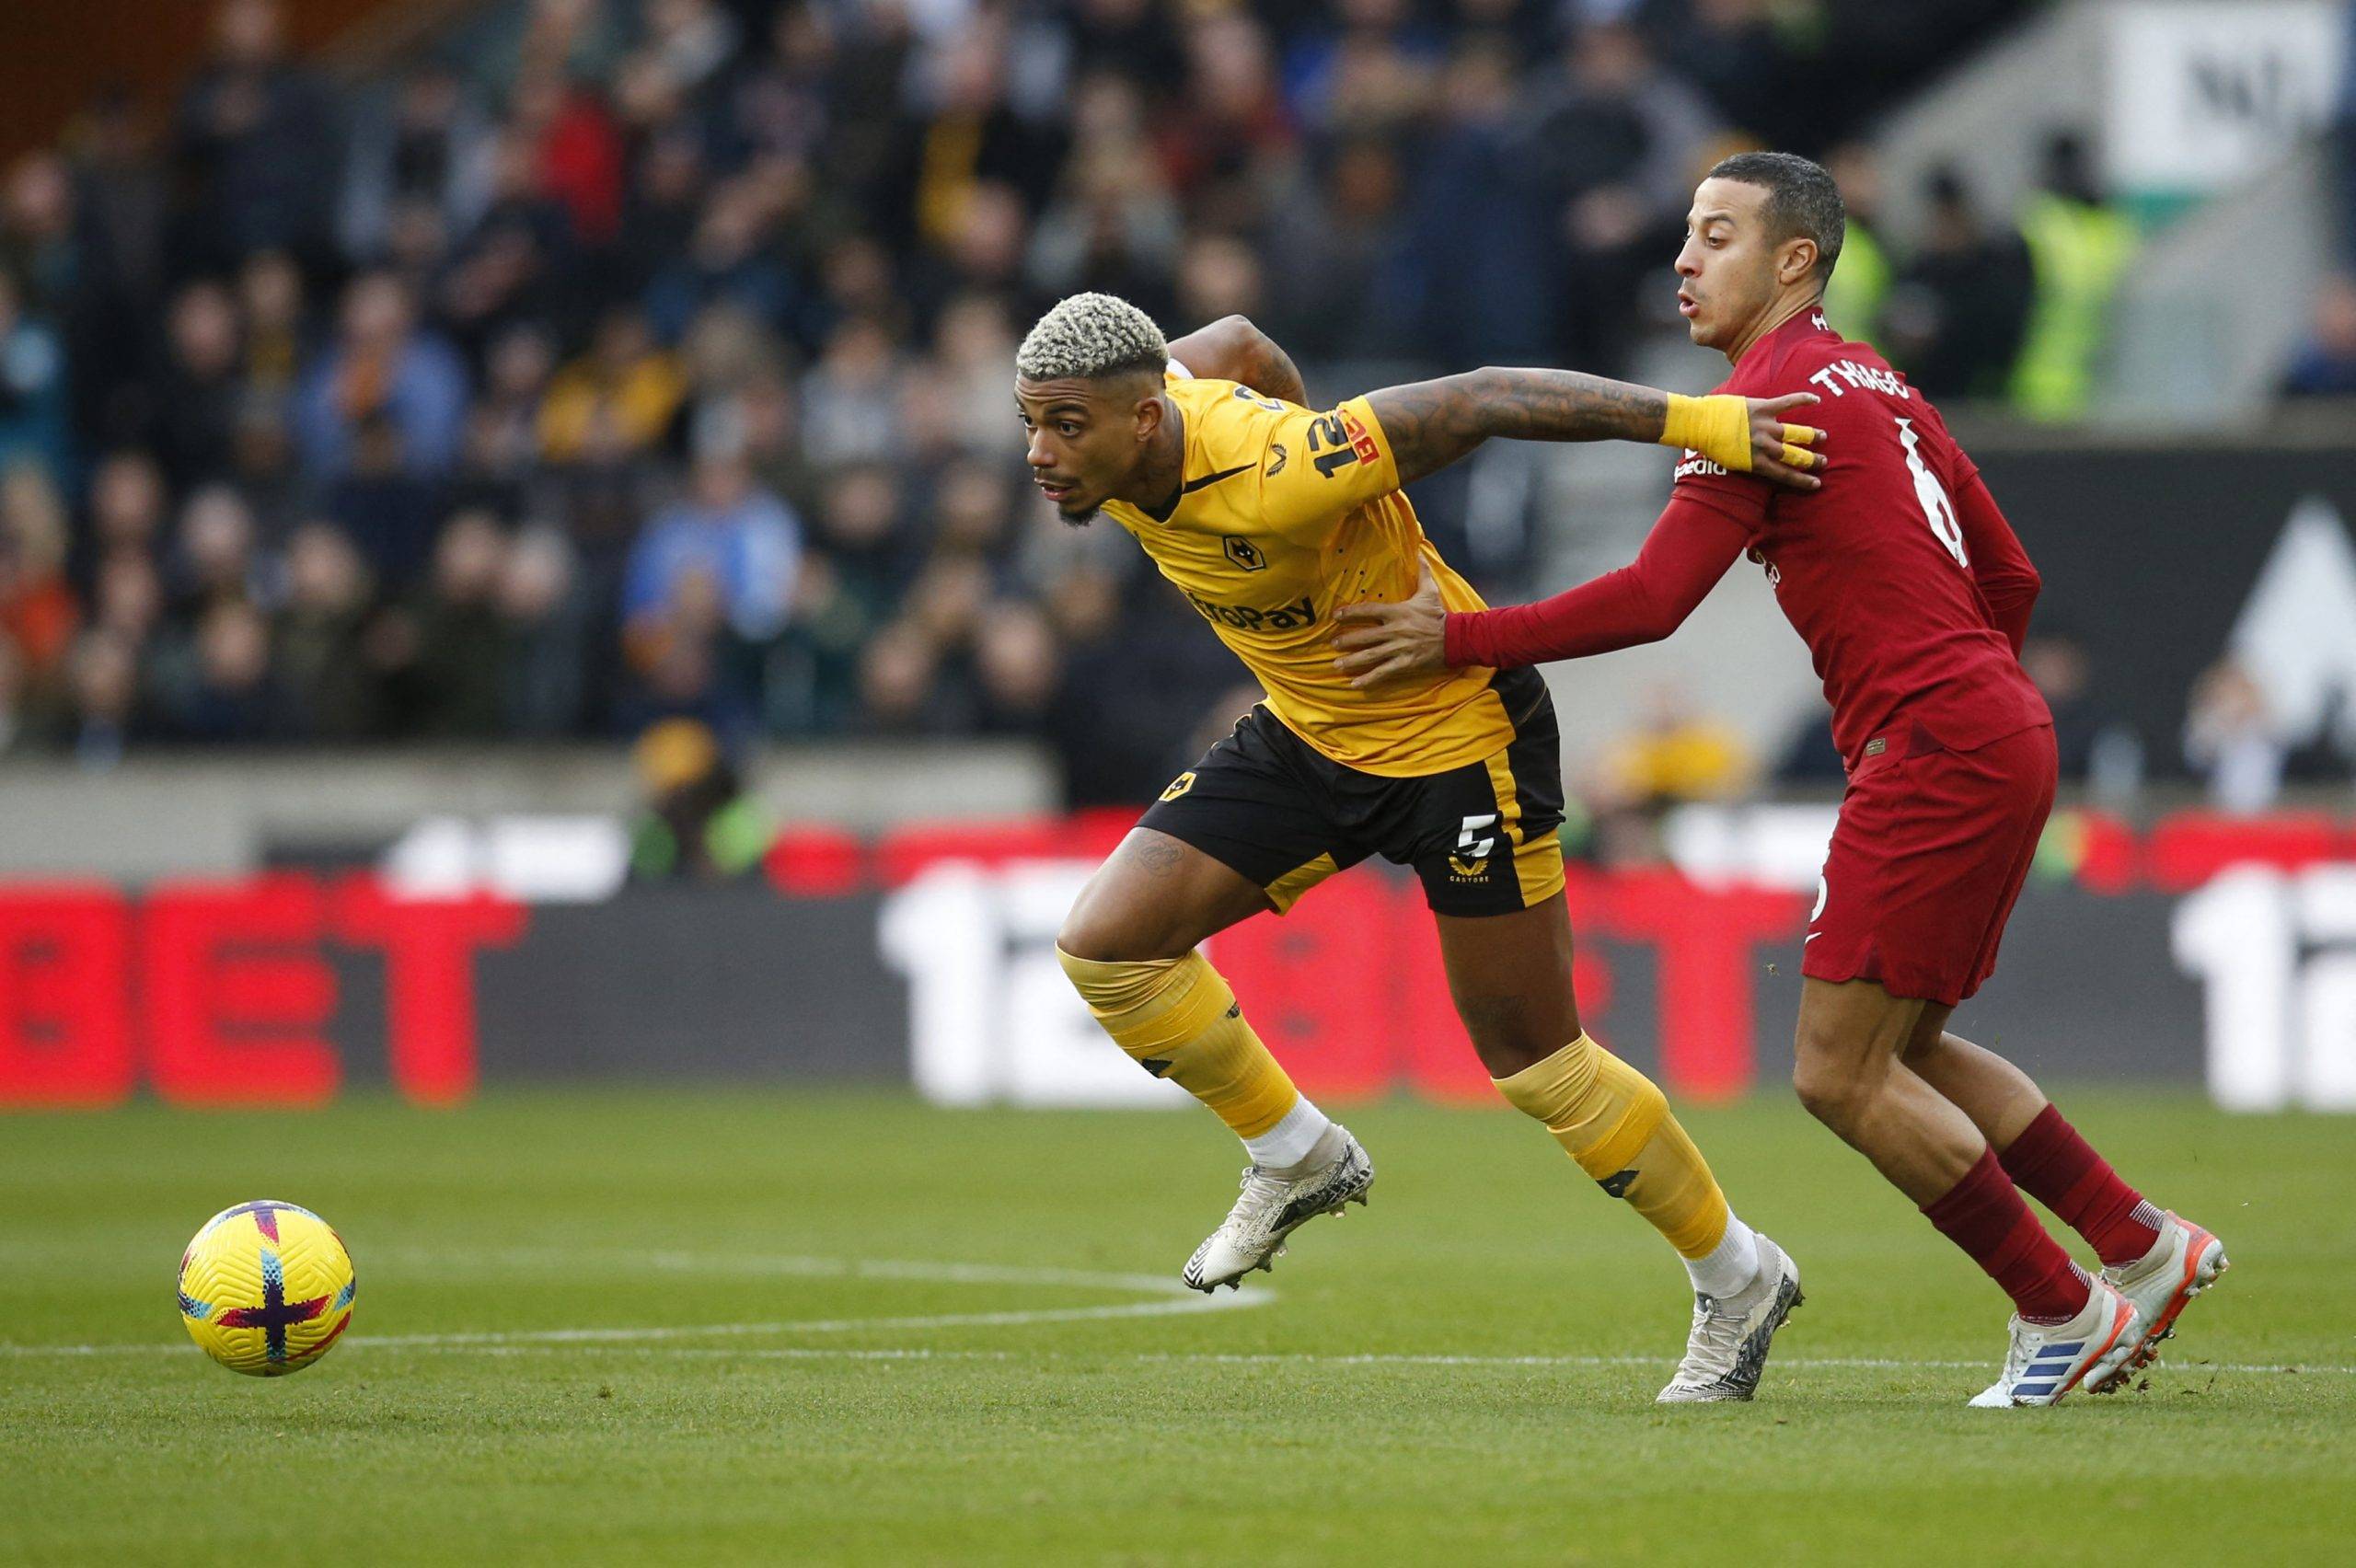 Wolves: Mario Lemina lauded in Liverpool win - Podcasts